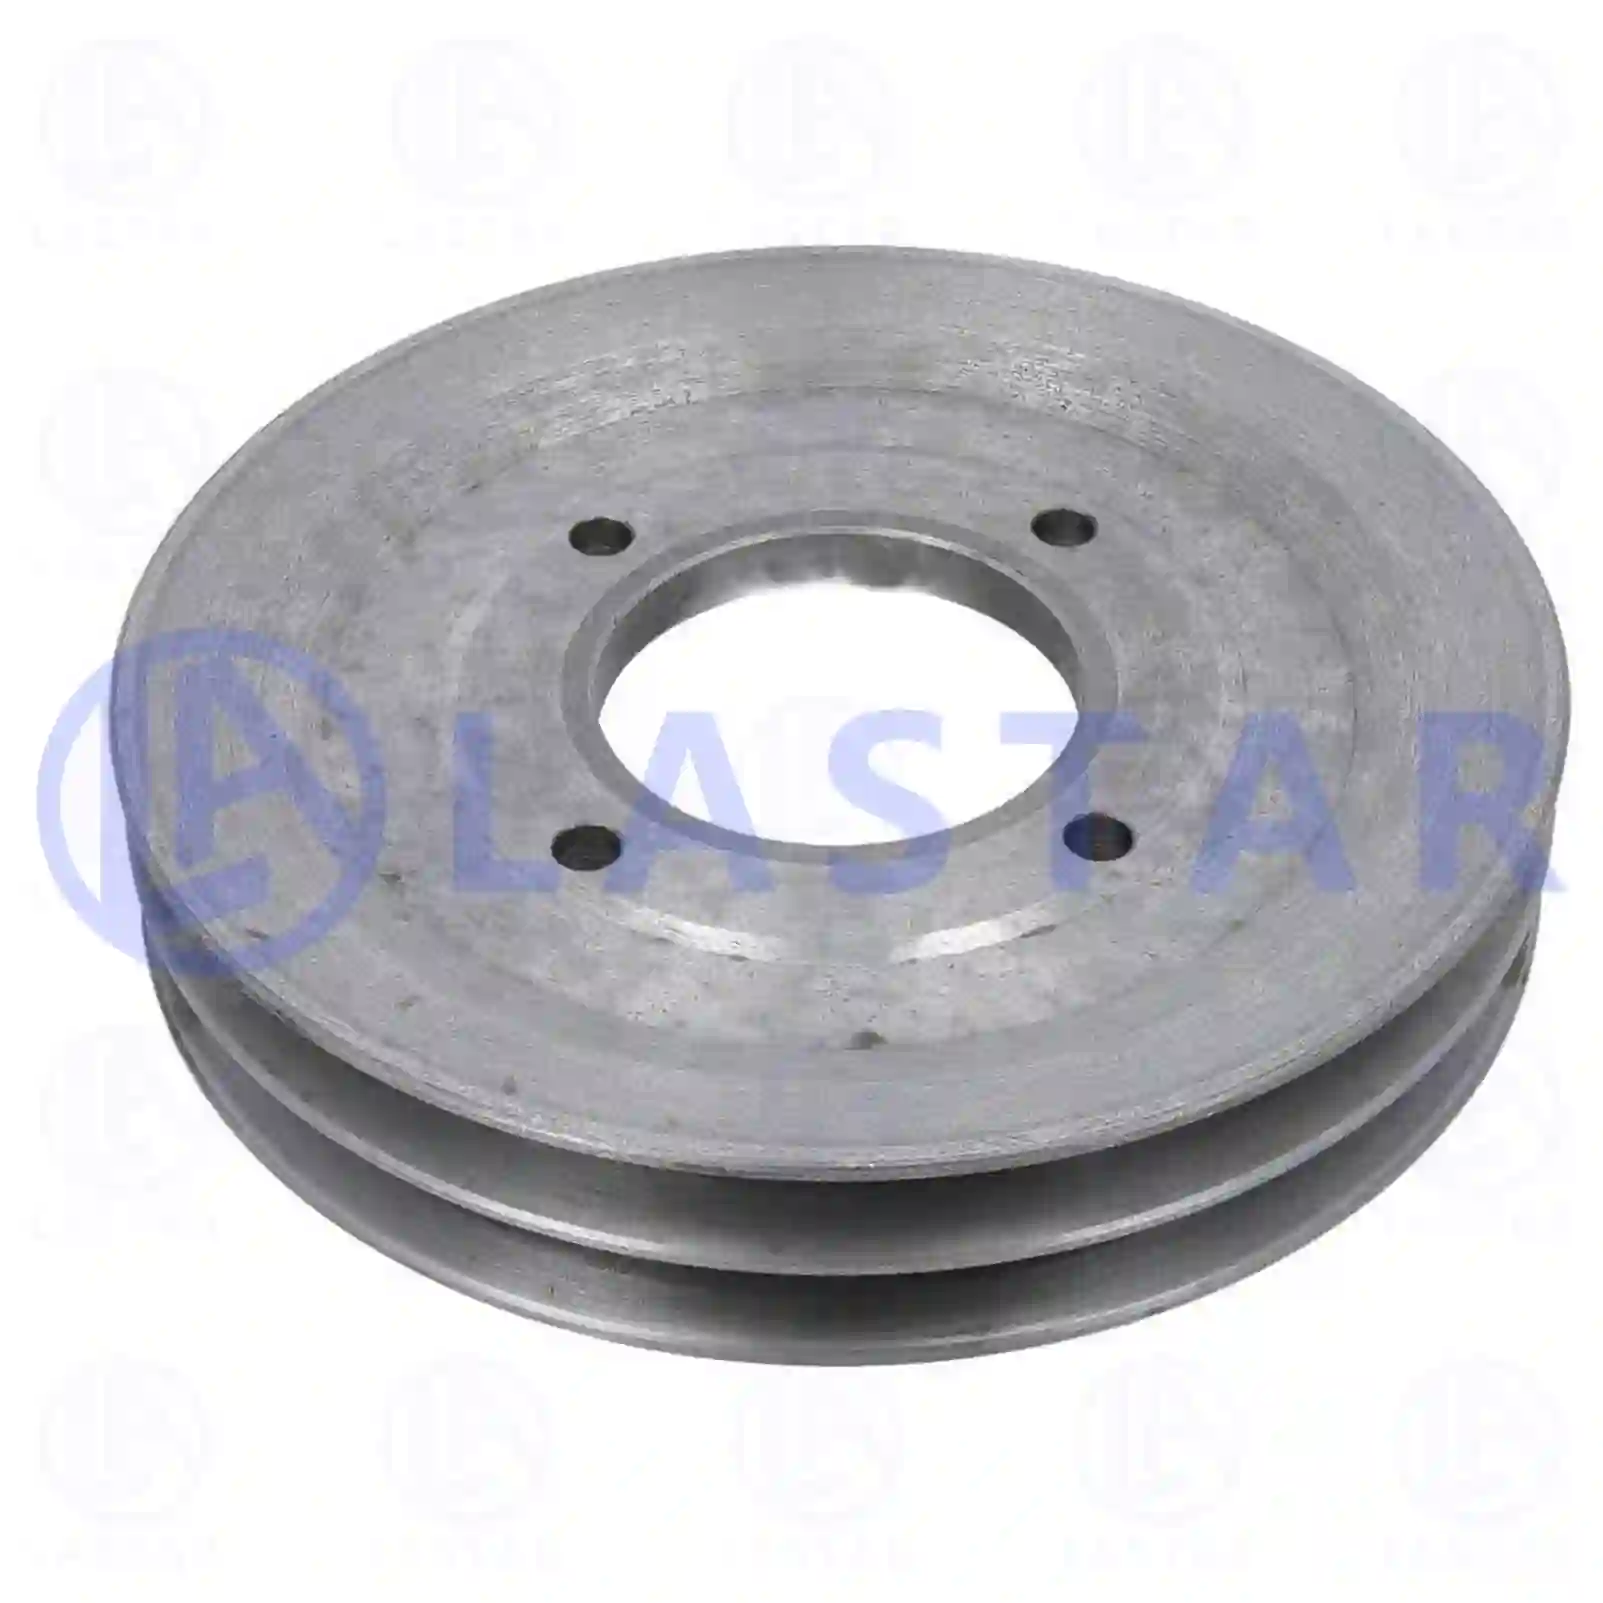 Pulley, fan drive, 77707469, 3575060210 ||  77707469 Lastar Spare Part | Truck Spare Parts, Auotomotive Spare Parts Pulley, fan drive, 77707469, 3575060210 ||  77707469 Lastar Spare Part | Truck Spare Parts, Auotomotive Spare Parts